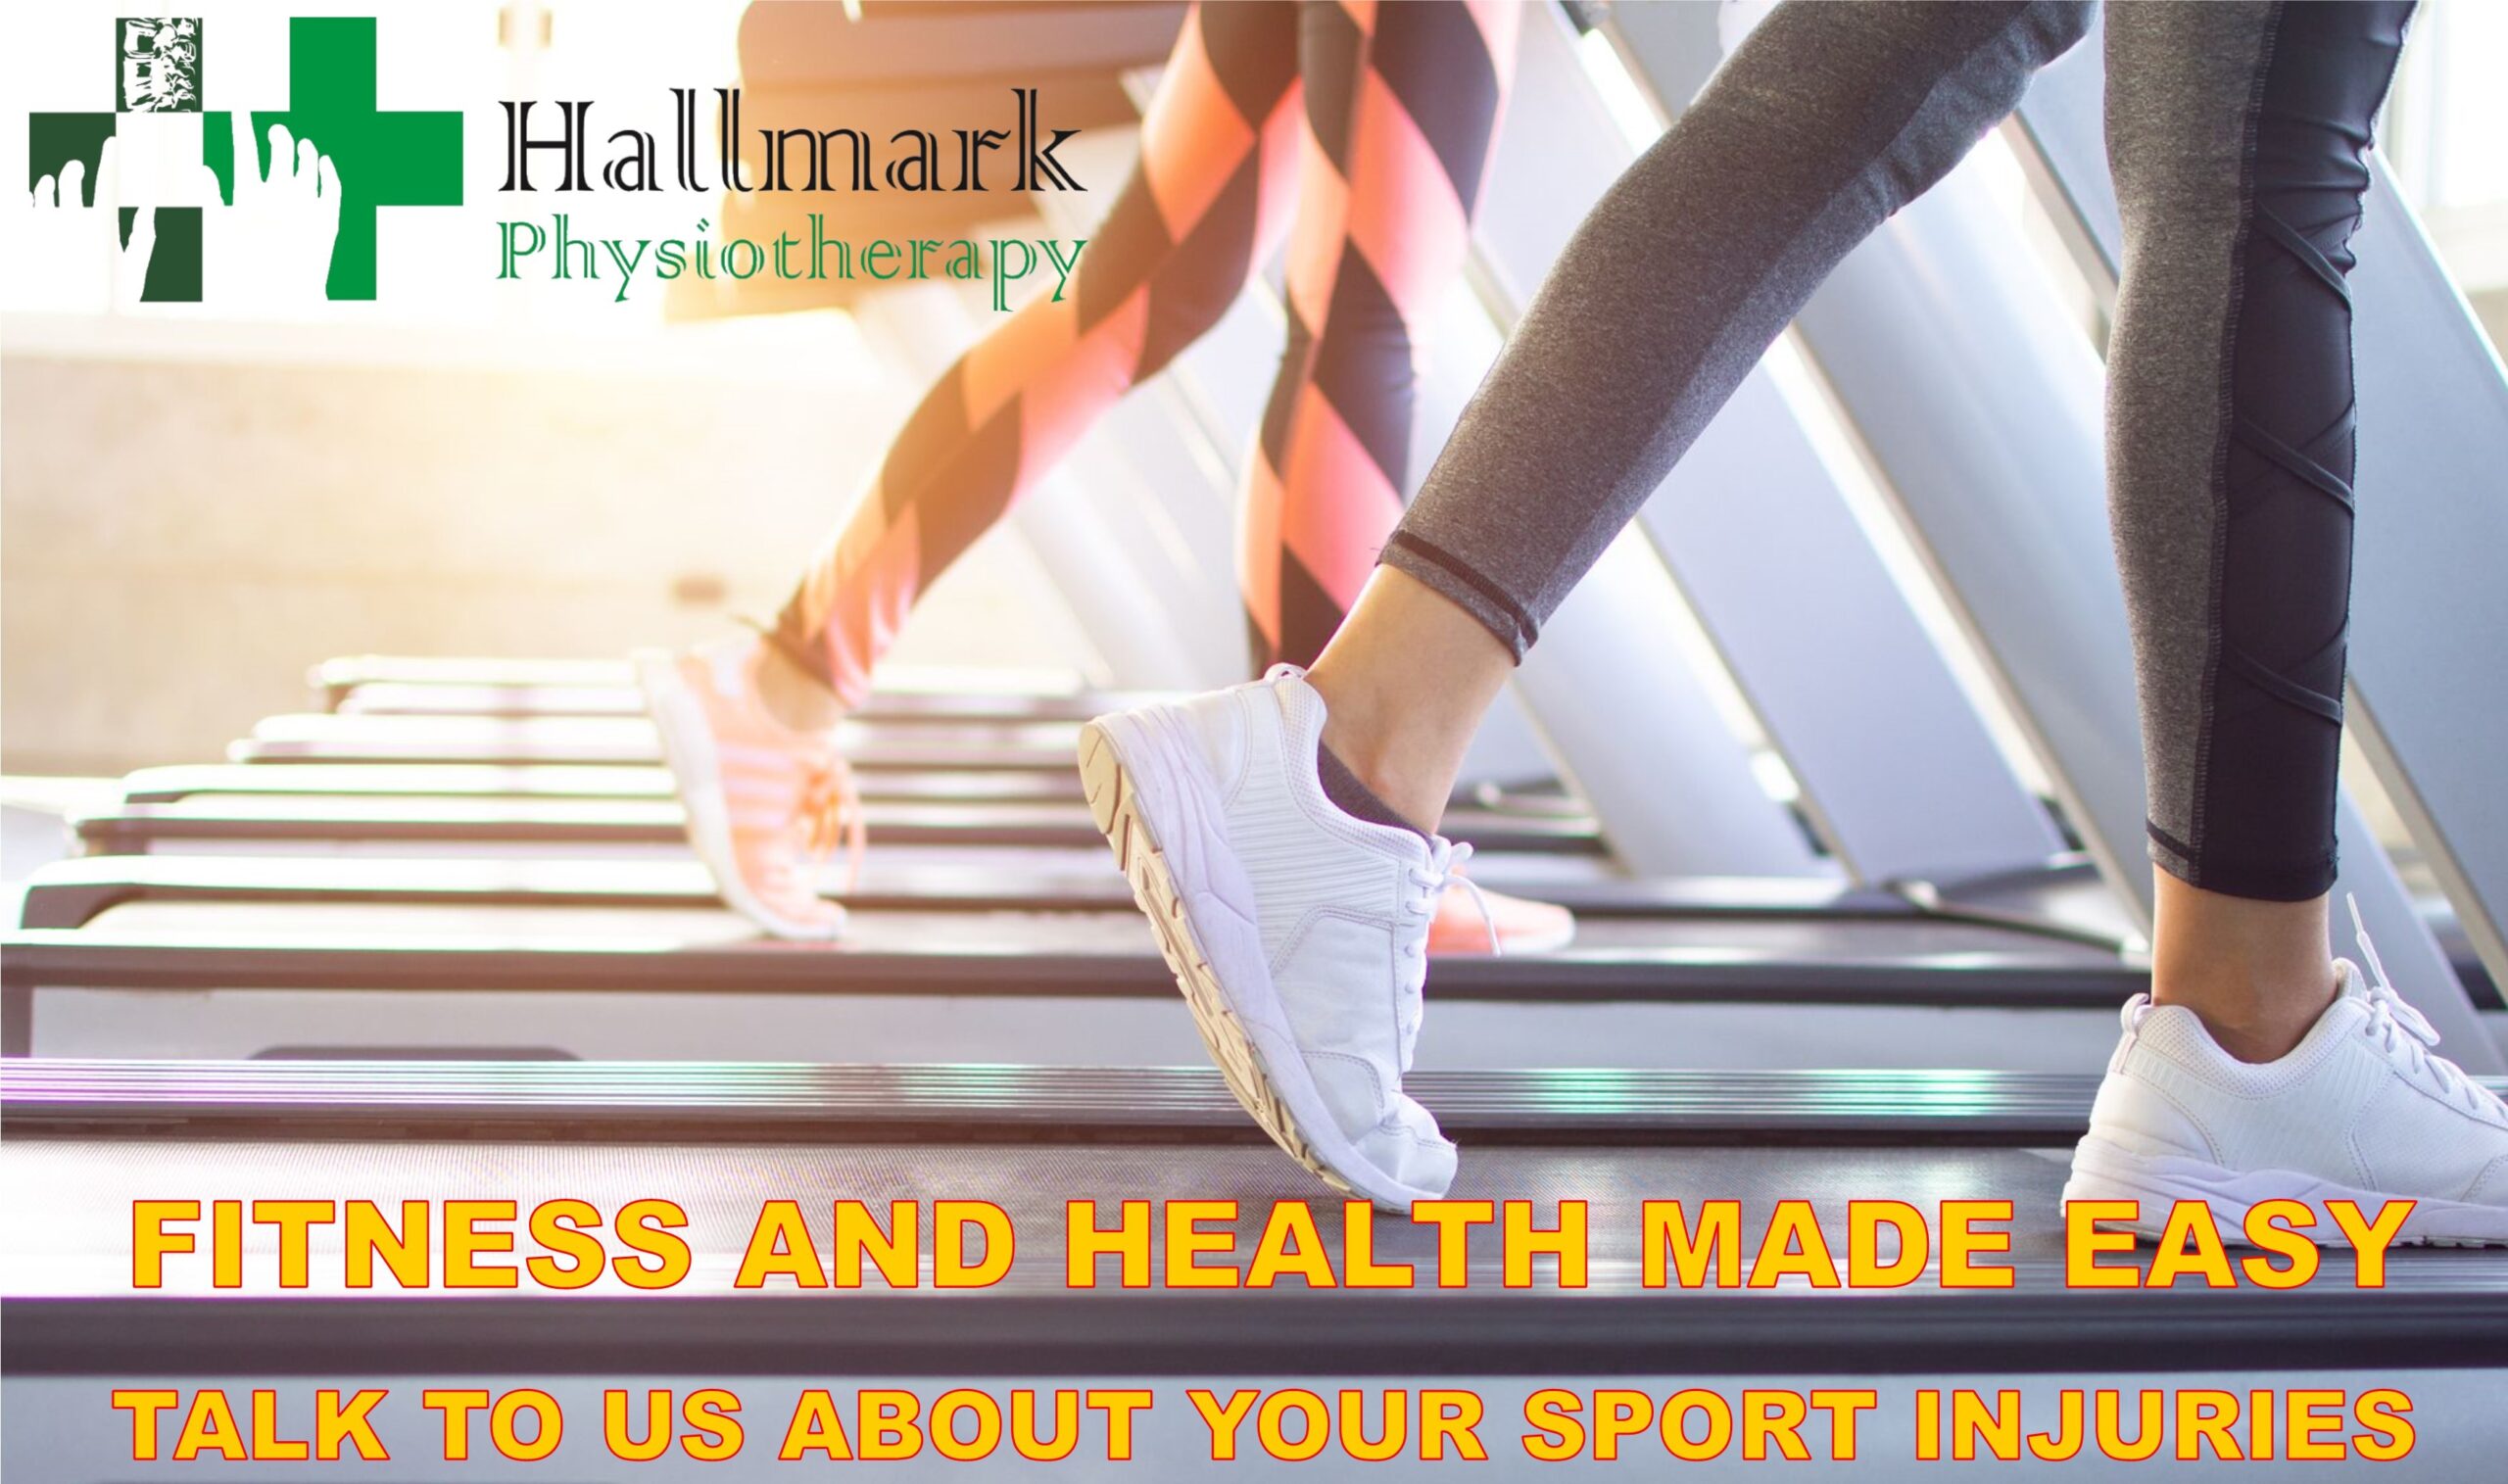 Home physiotherapy services